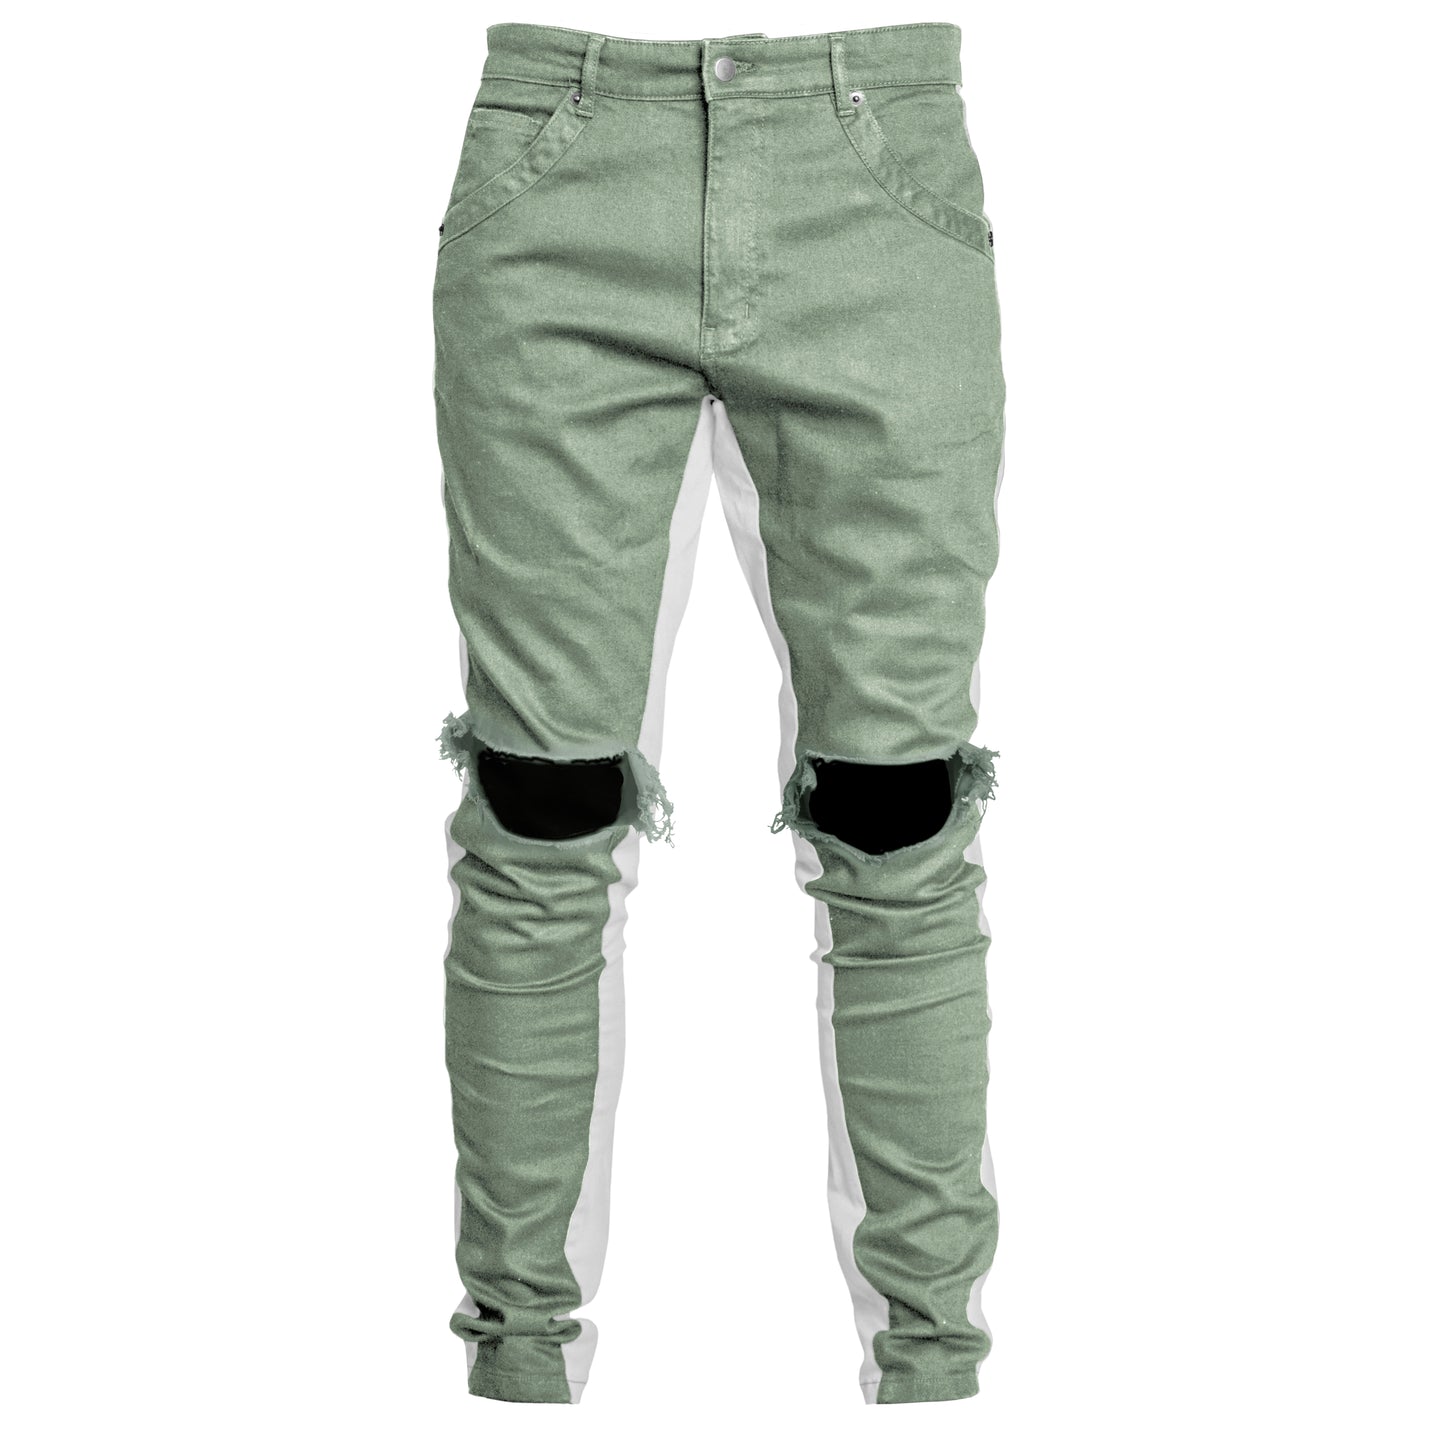 Track Jeans : Faded Sage/White